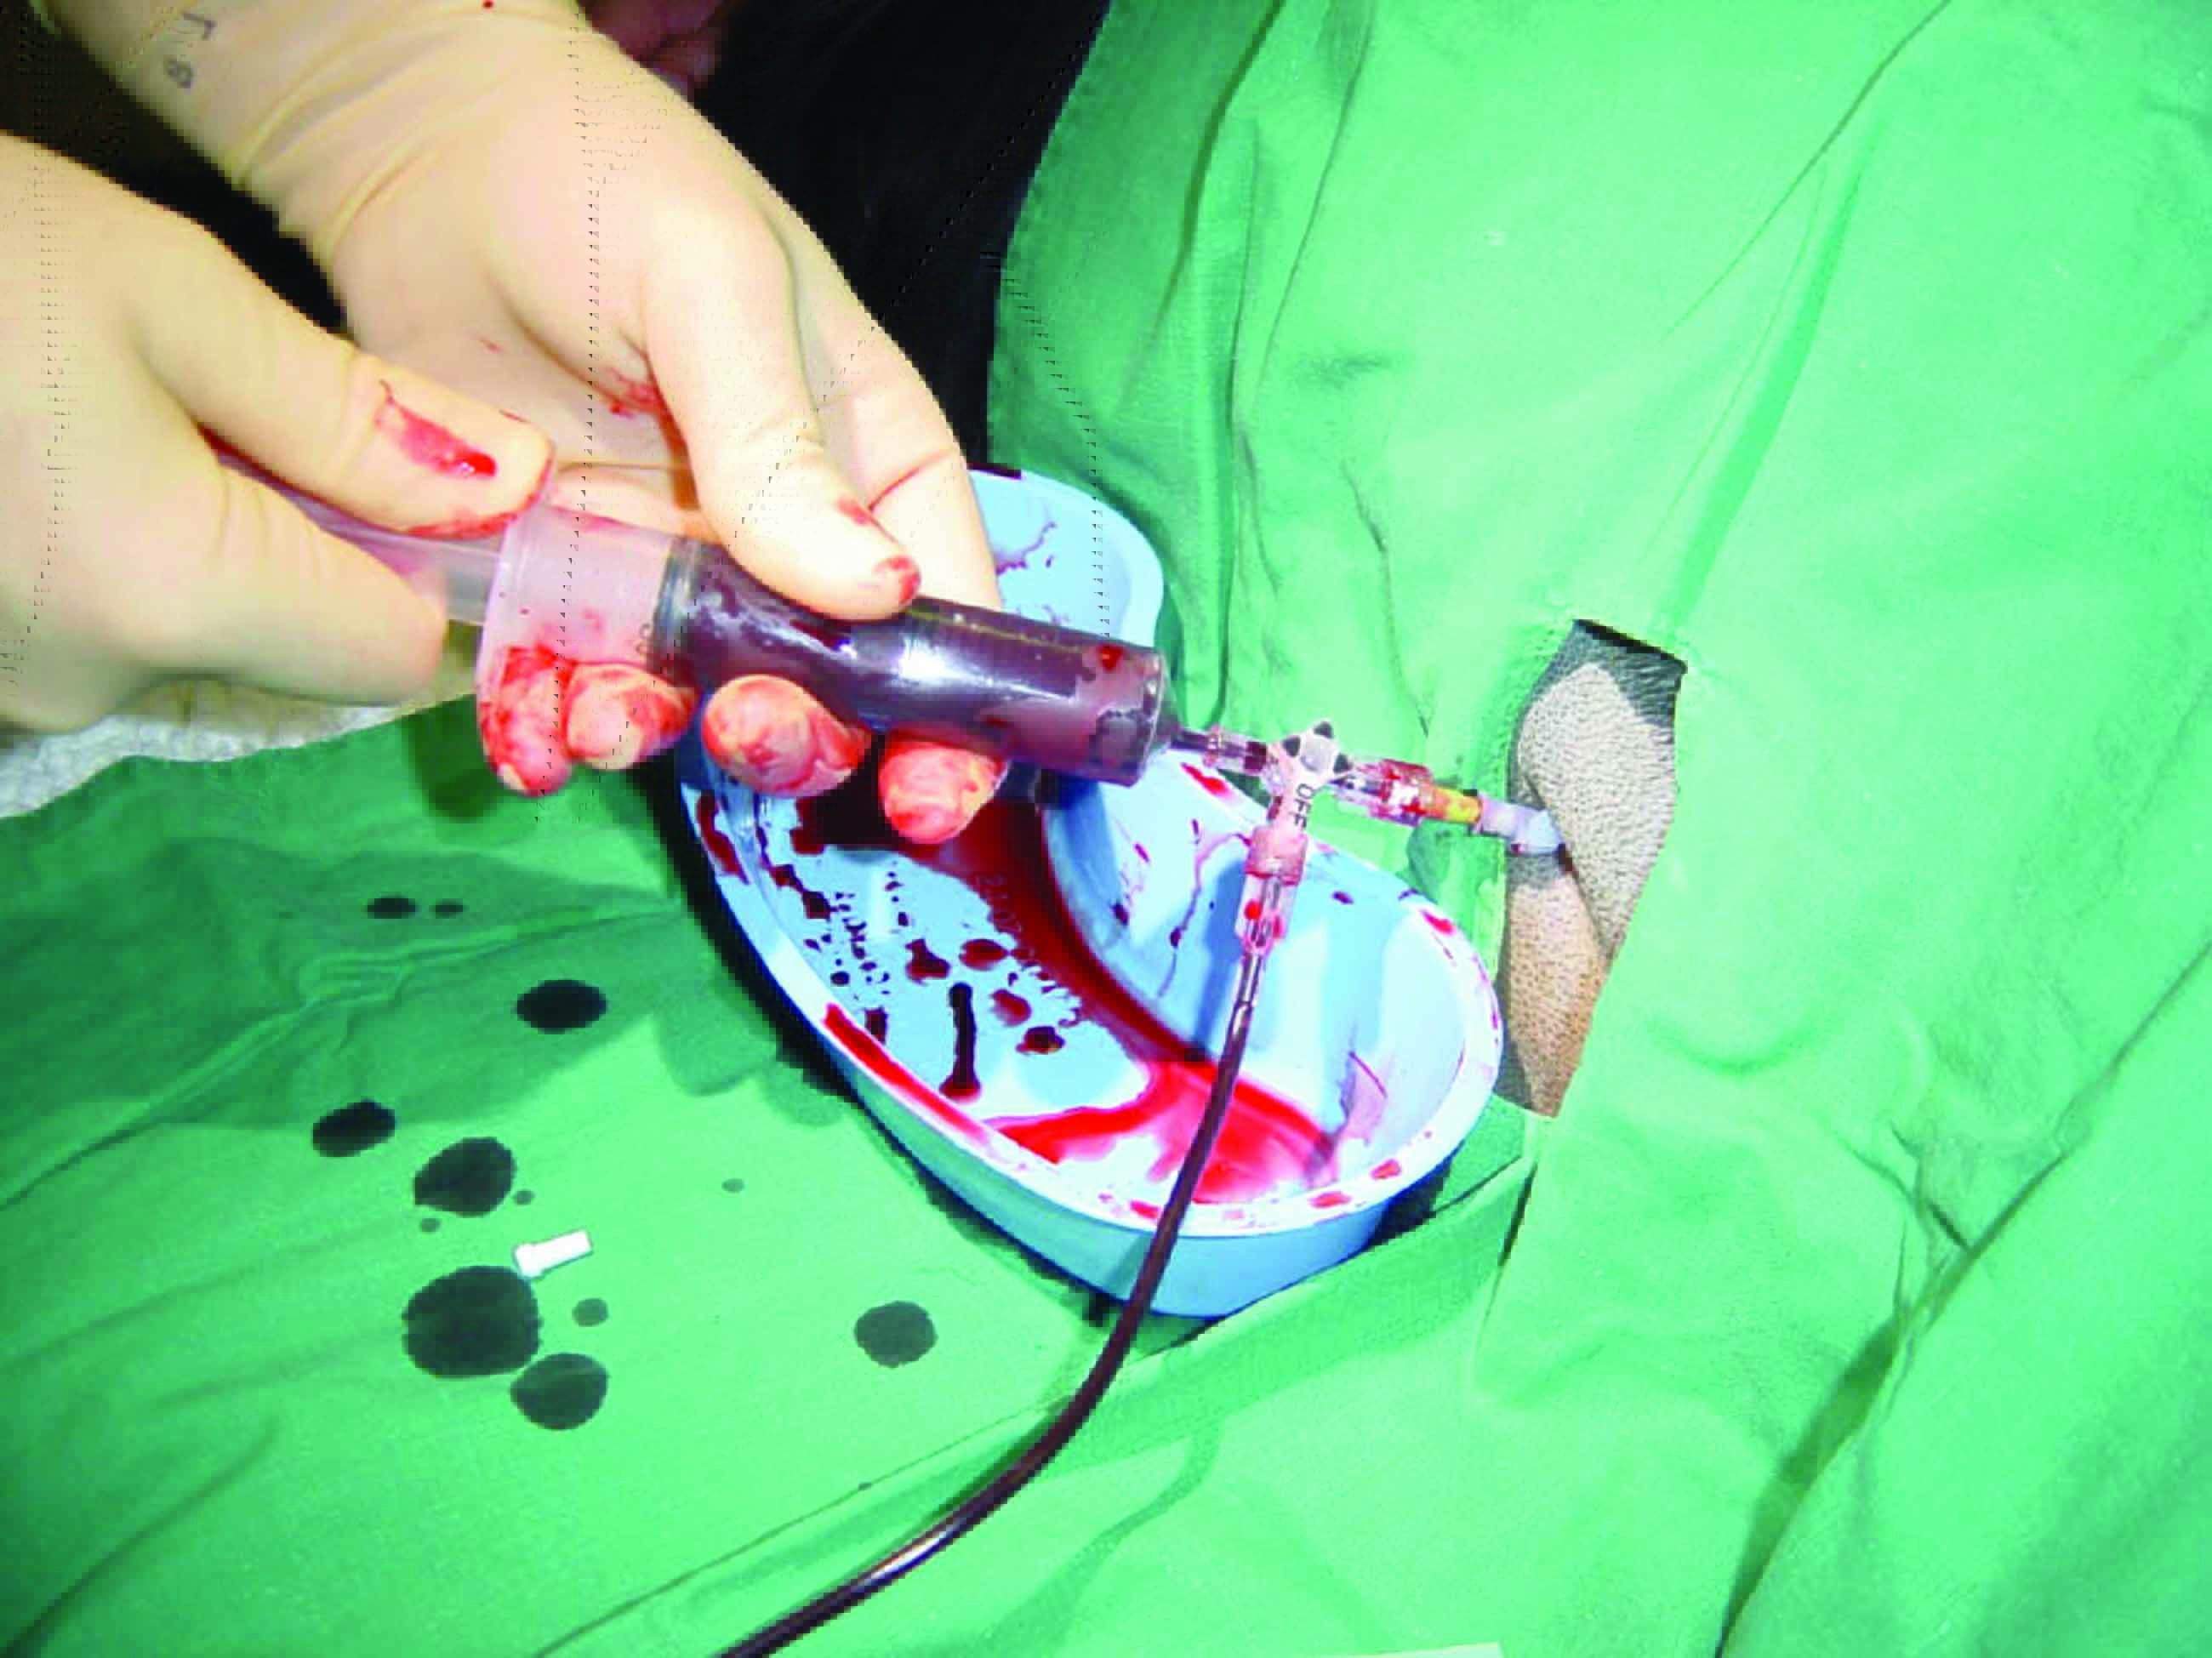 pericardiocentesis performed using a pre-fenestrated soft catheter